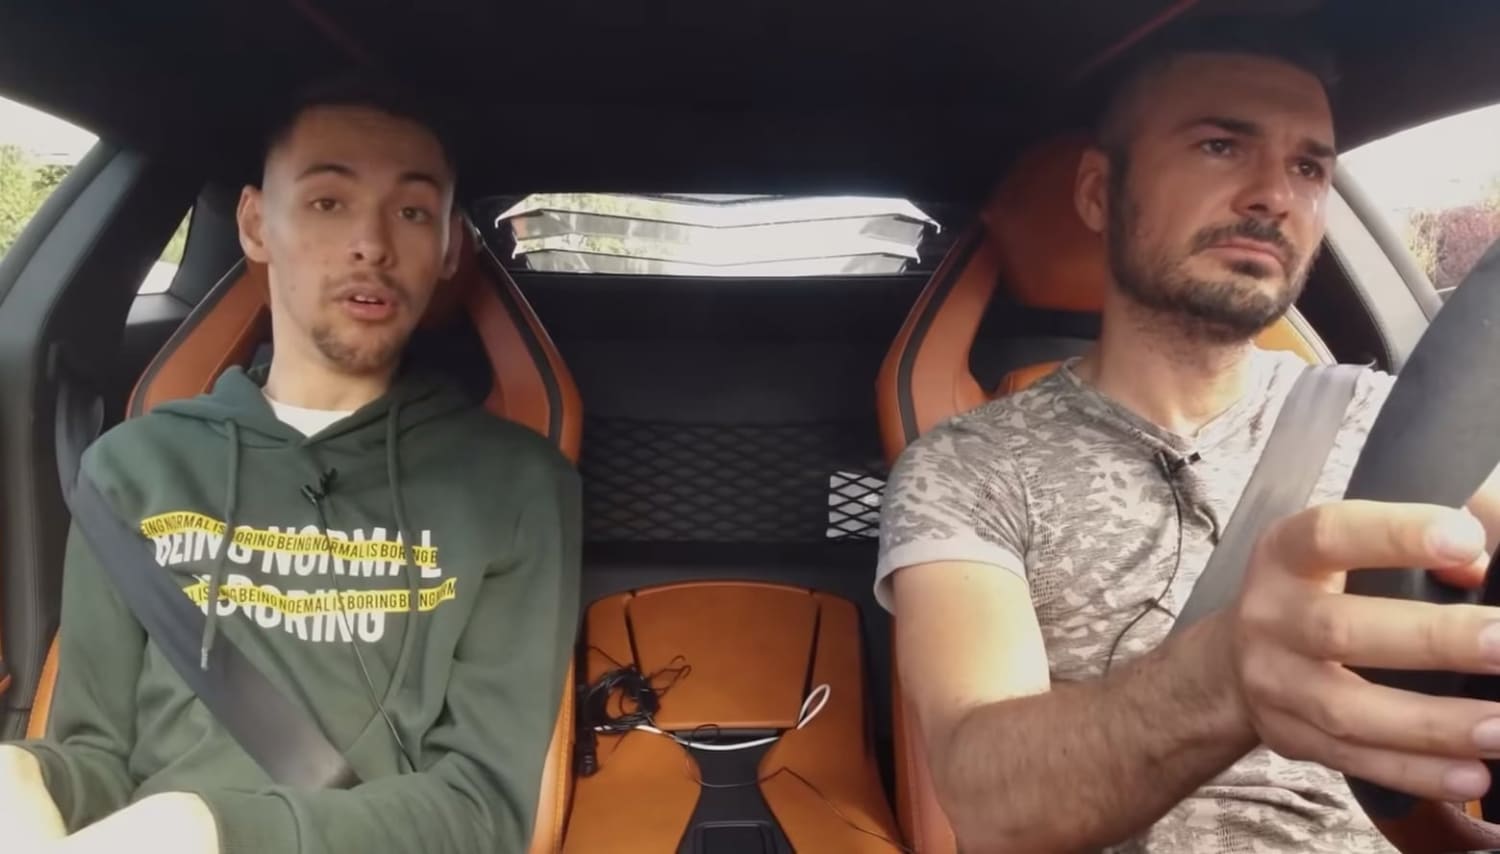 A genuine guy who has been pushed away by people due to his disability gets to fulfil his dreams to ride inside a Lamborghini!